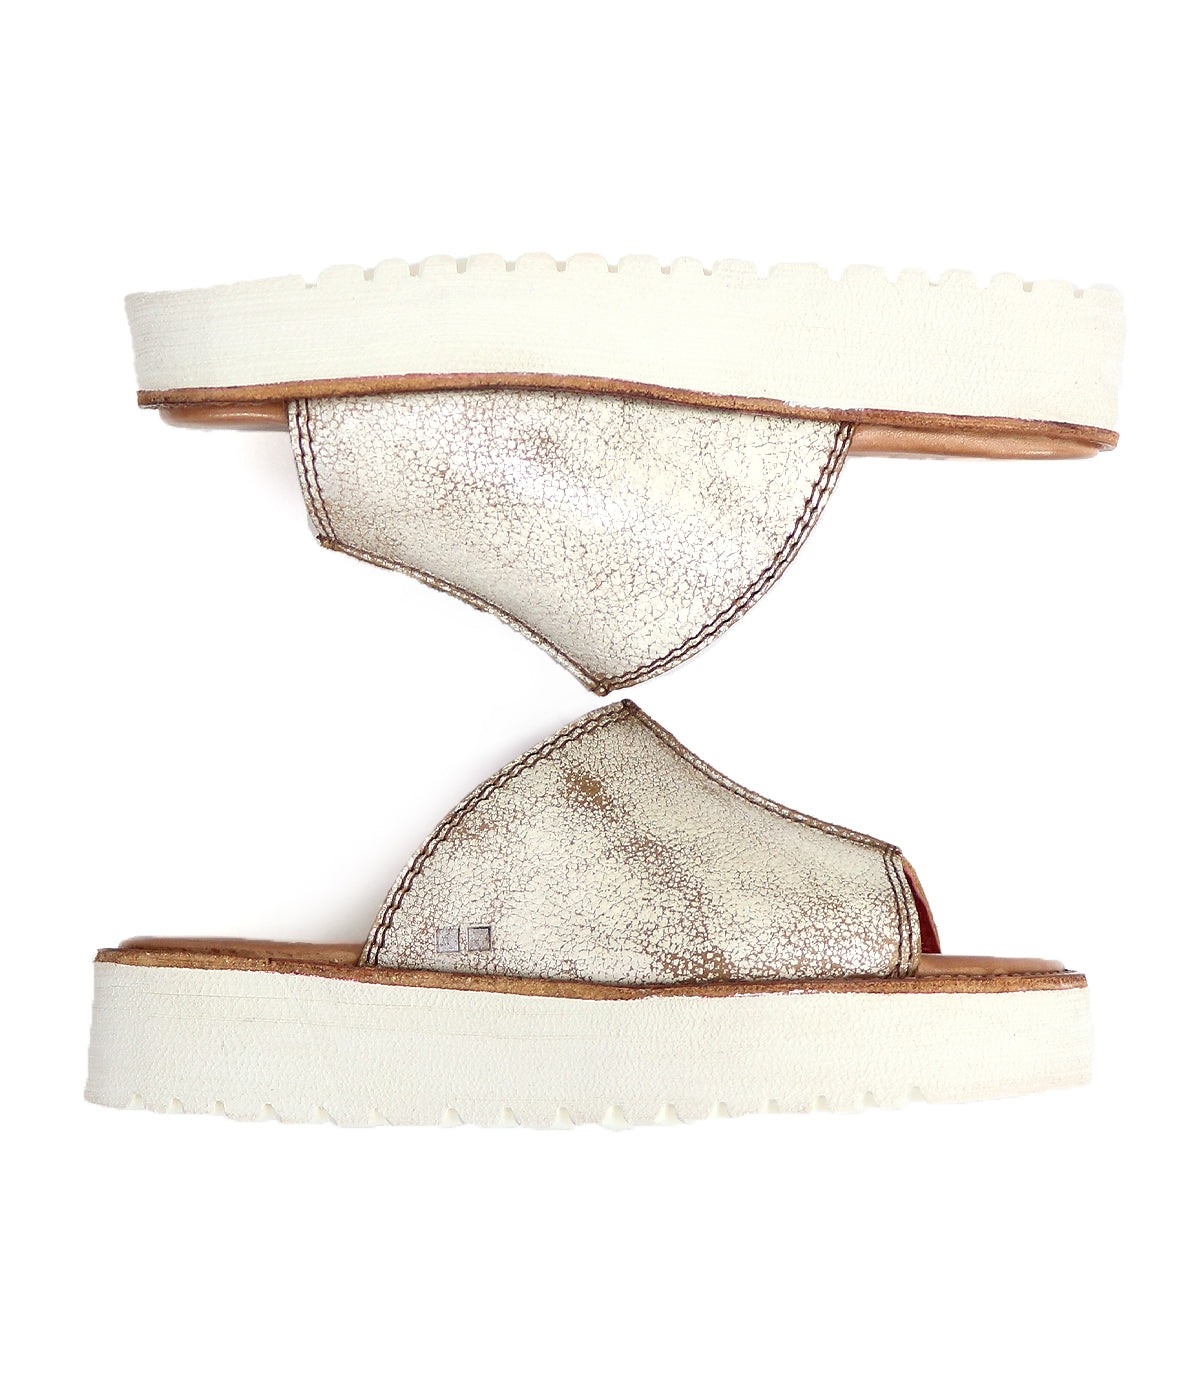 A pair of comfortable white leather Bed Stu Fairlee II slide sandals.